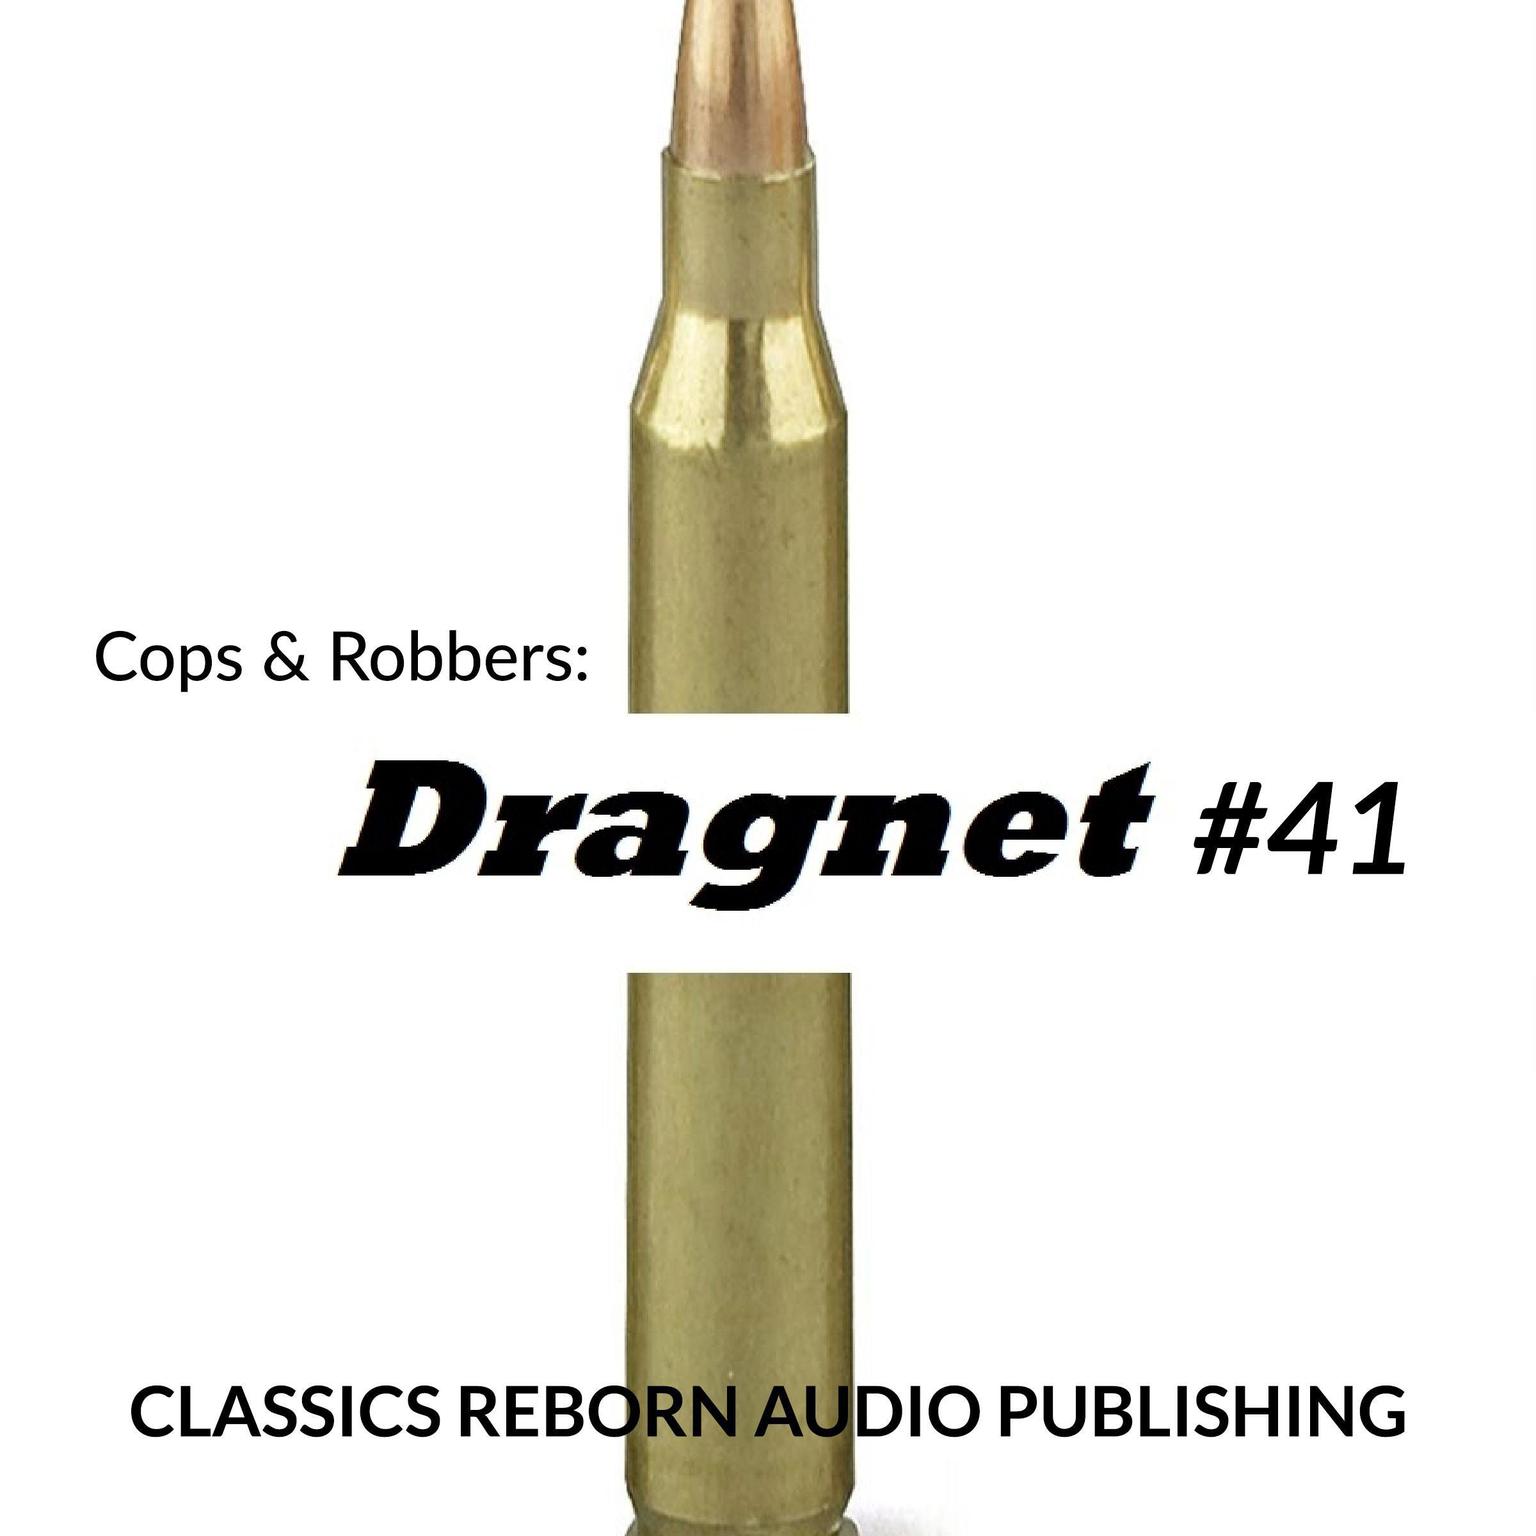 Cops & Robbers: Dragnet #41 Audiobook, by Classics Reborn Audio Publishing